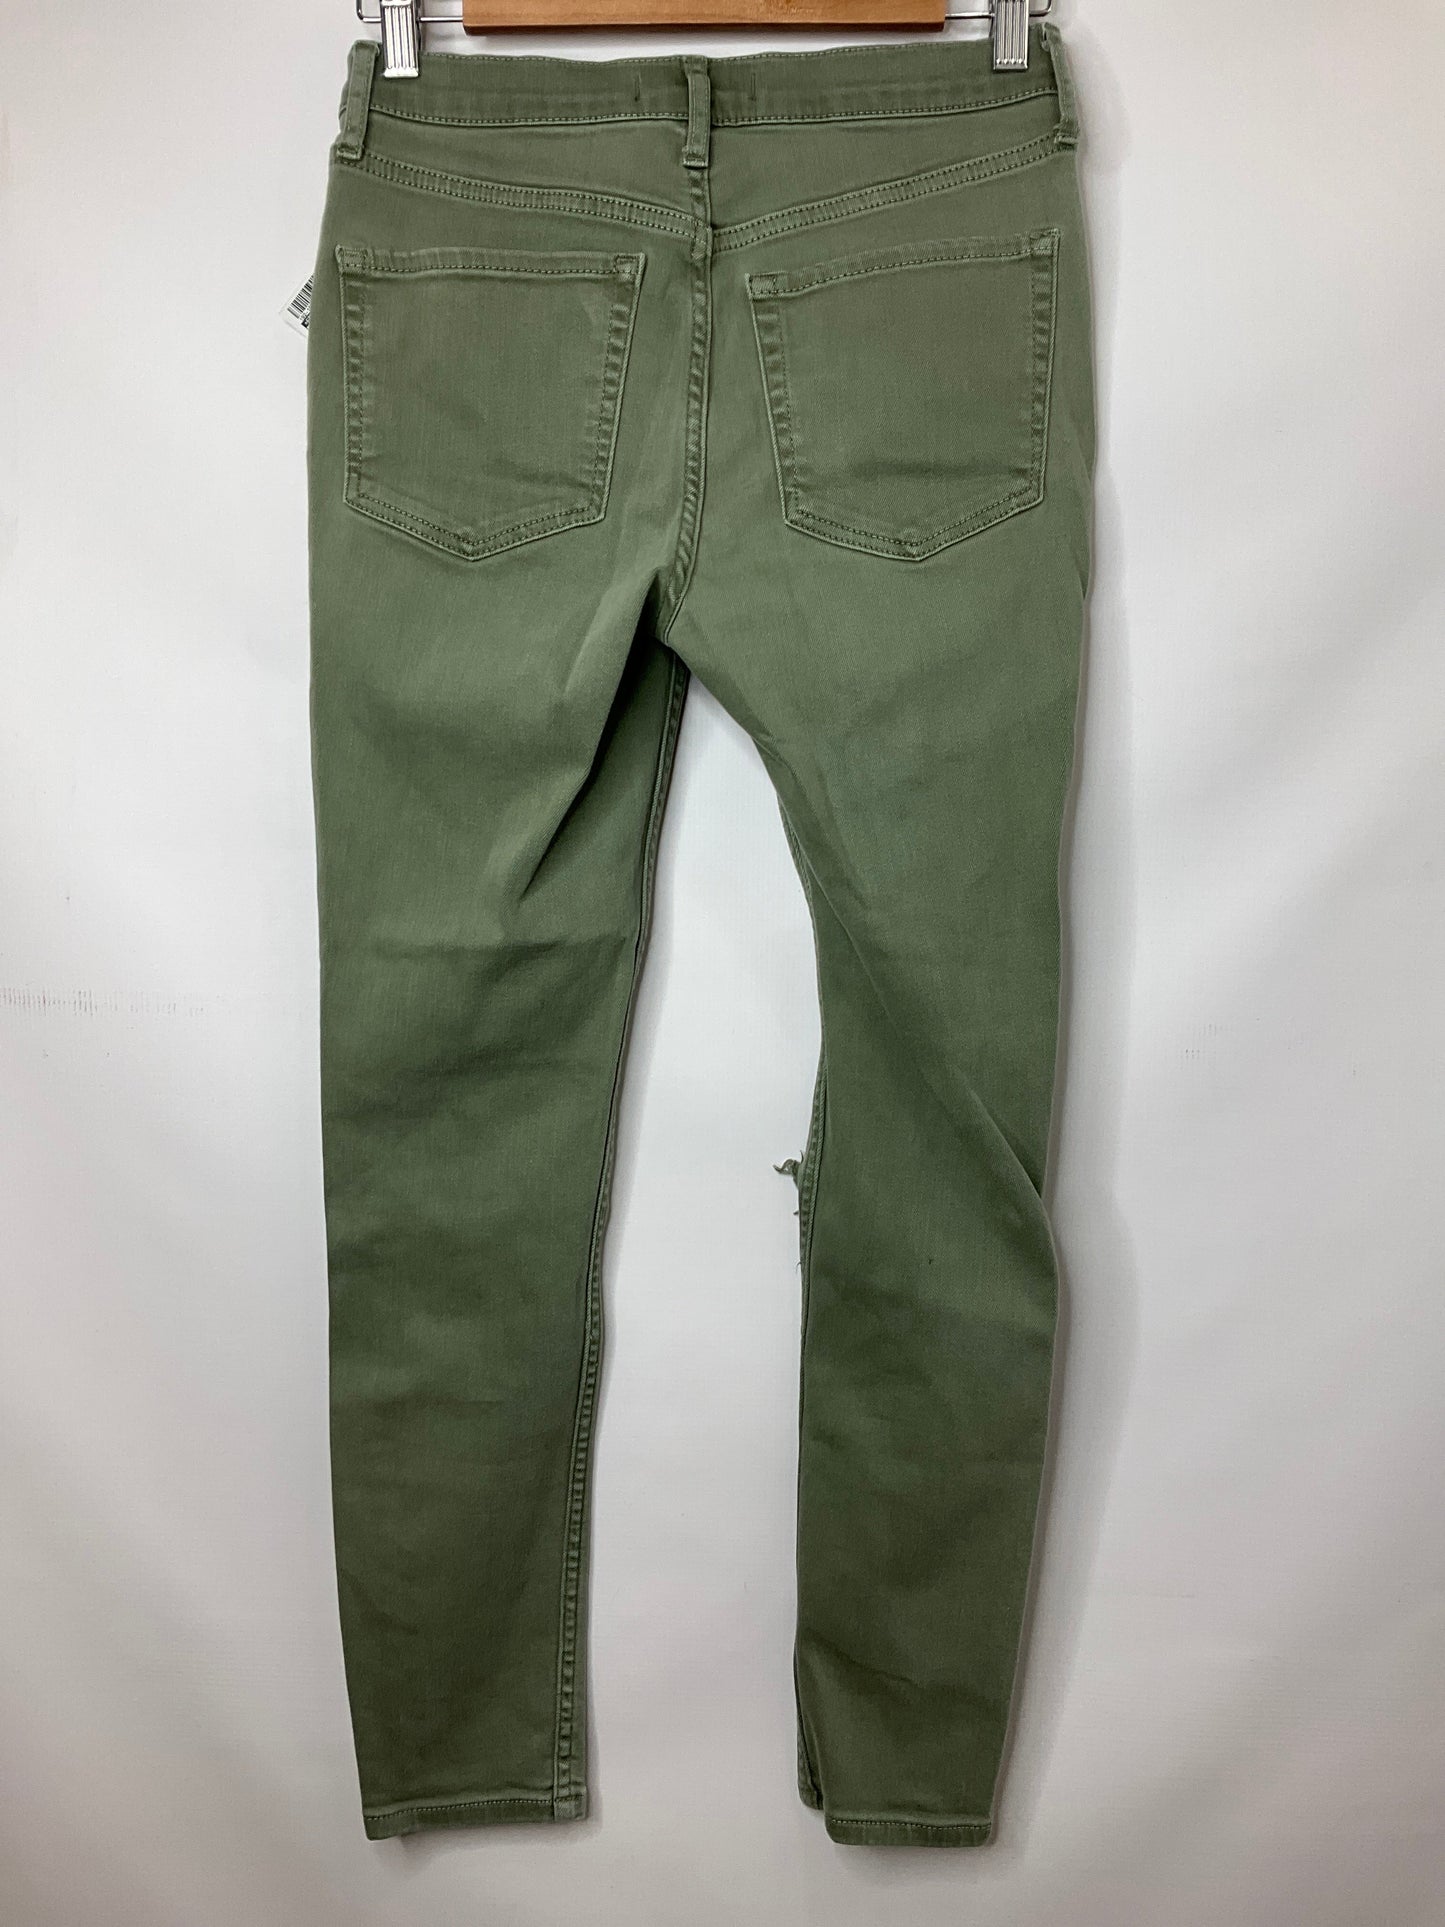 Green Pants Other Free People, Size 6